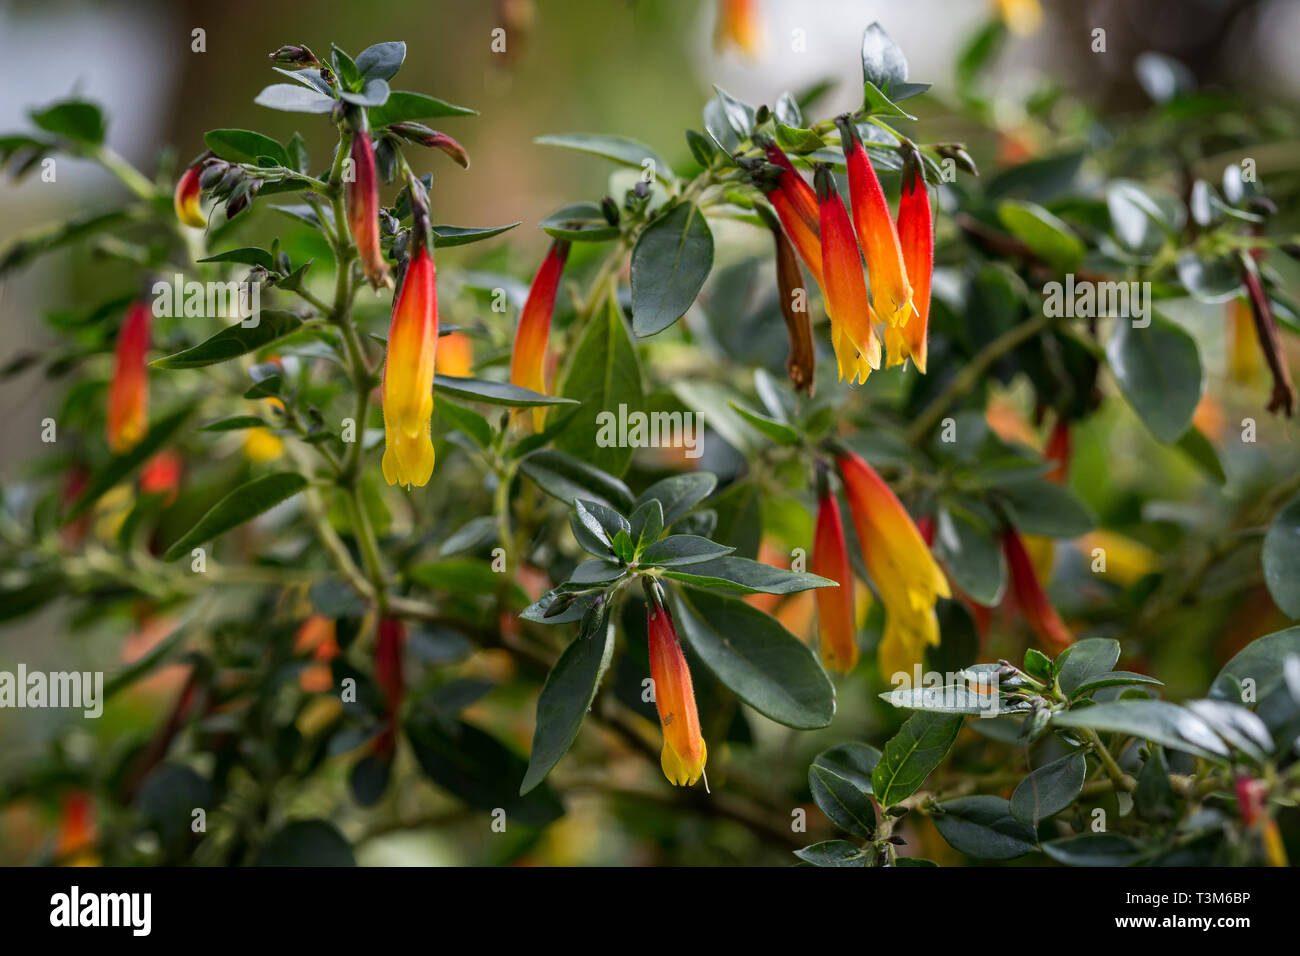 Close-up of Justicia rizzinii or floribunda plant's flowers (common name Brazilian fuchsia). It's a species of flowering plant in family Acanthaceae. Stock Photo